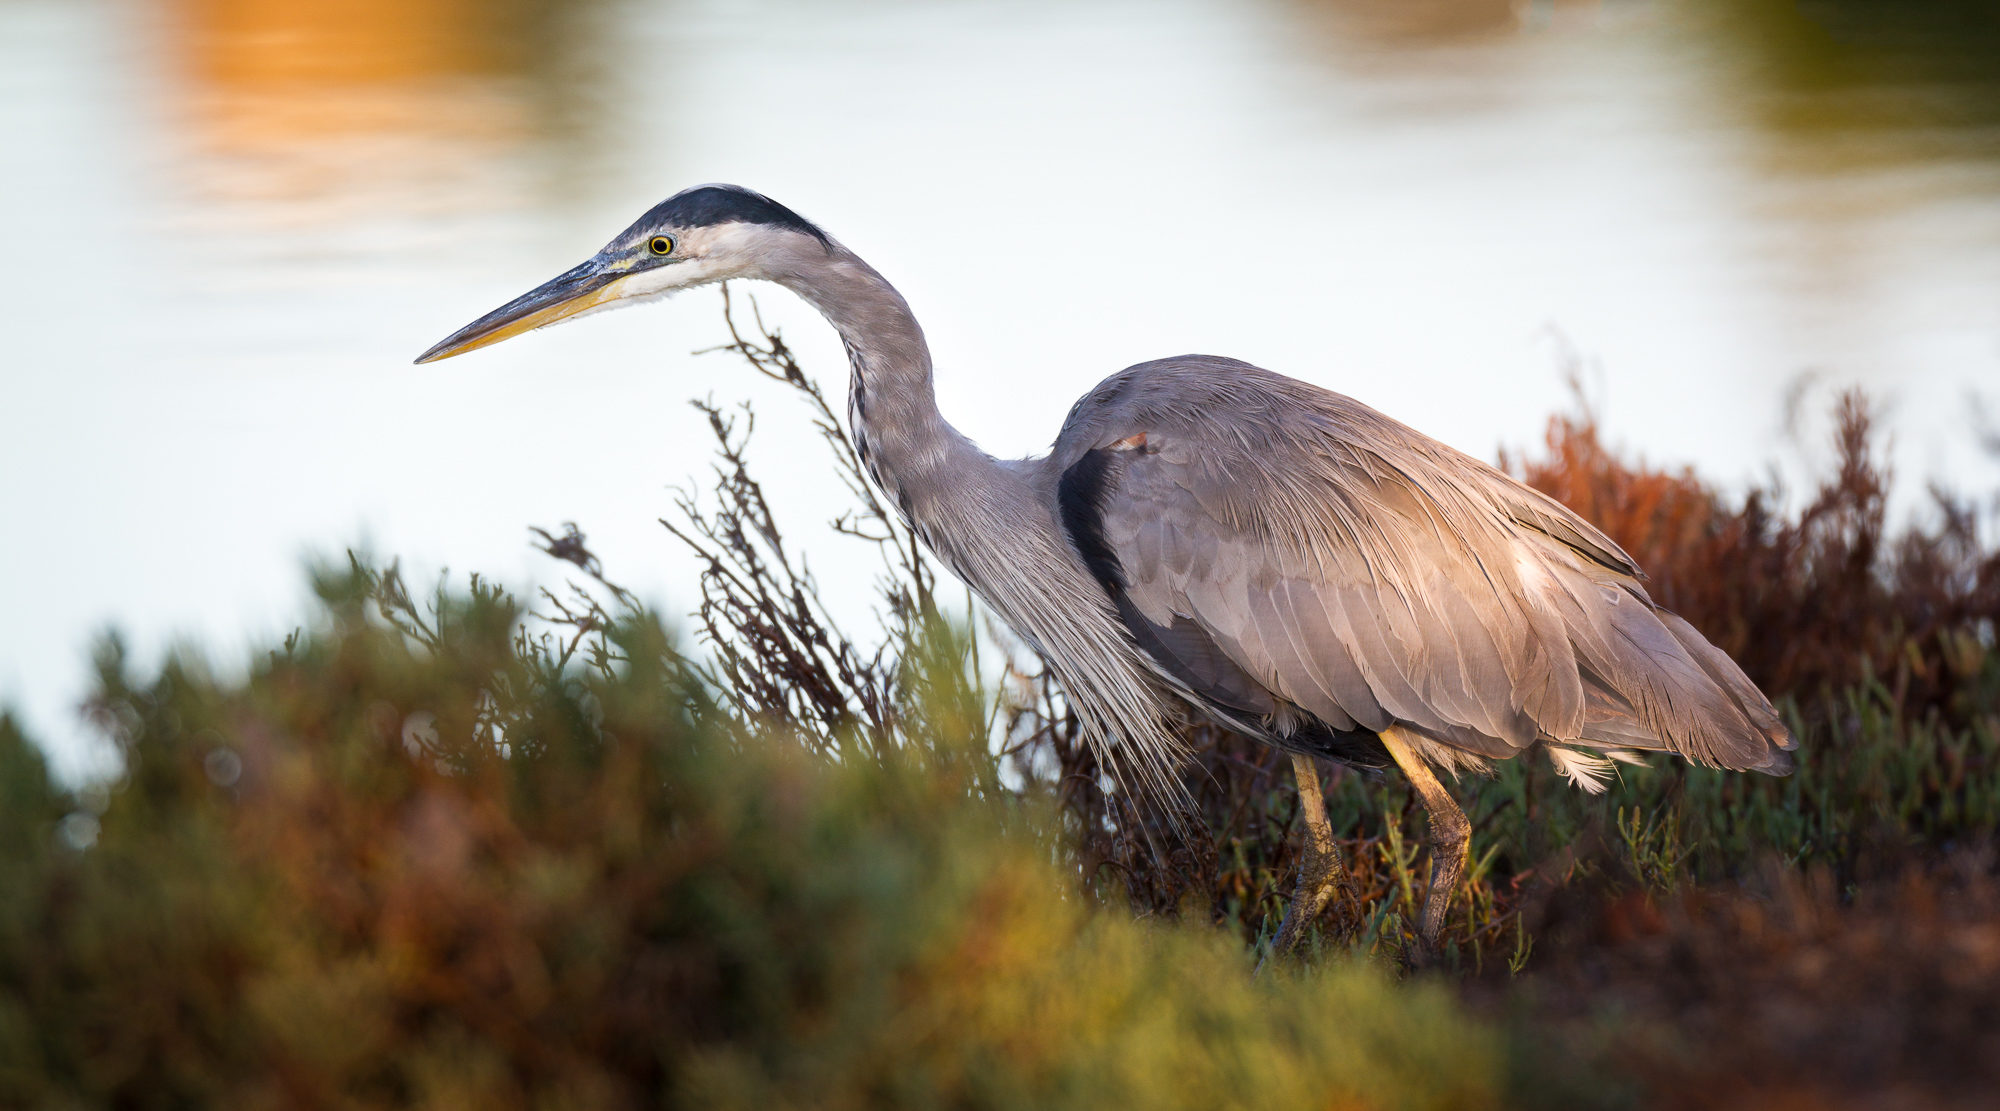 A great blue heron stands along the shore of a canal in early morning light